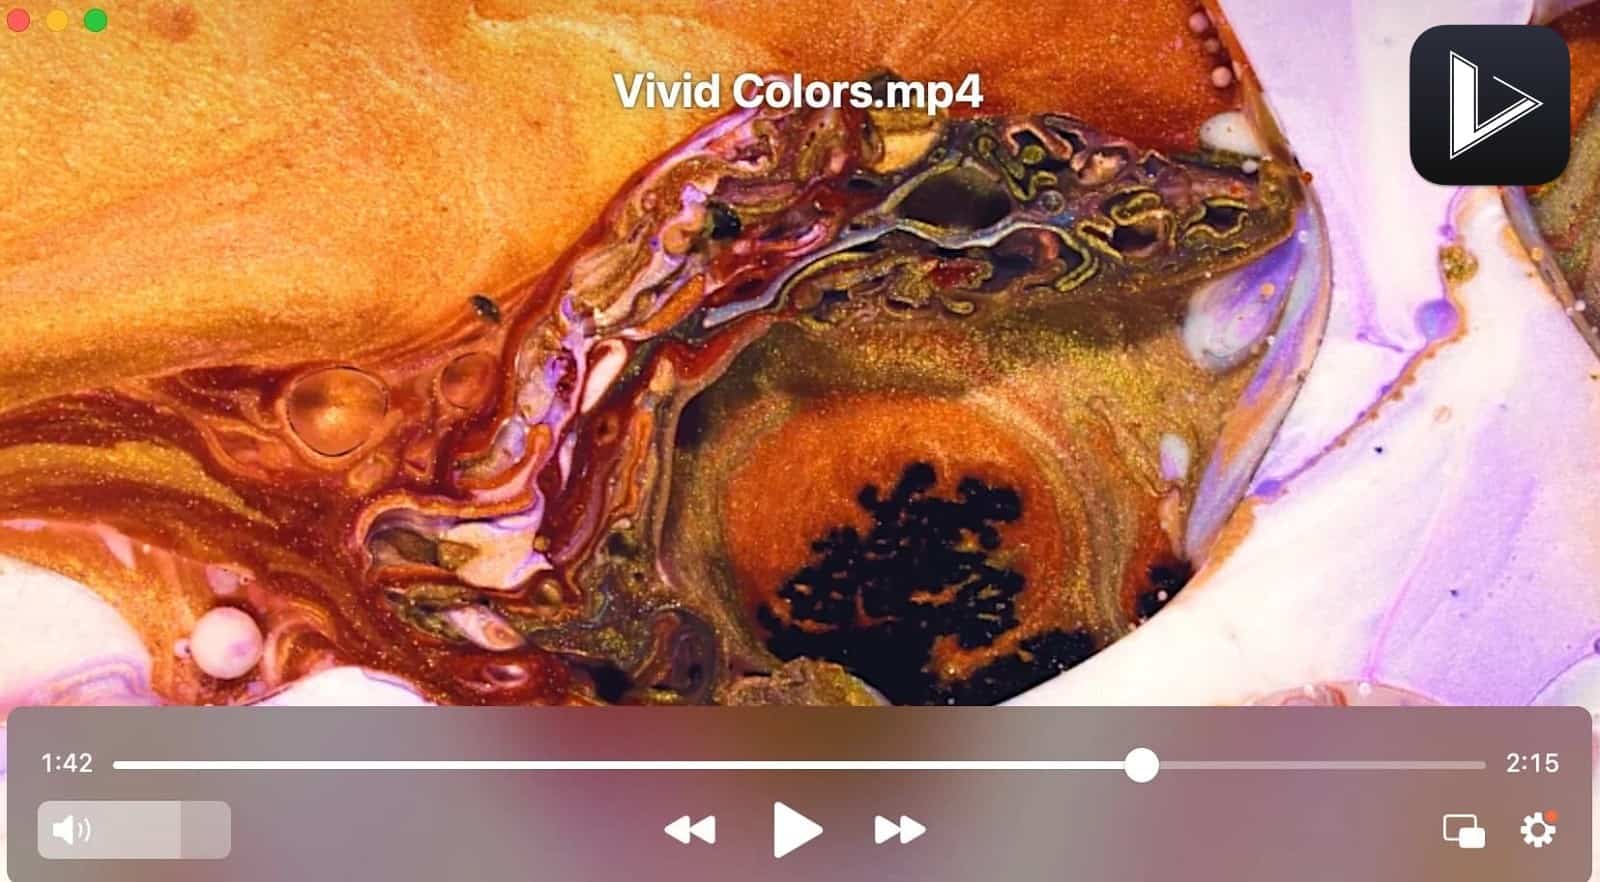 It's a nice VLC alternative for Mac with easy to use interface